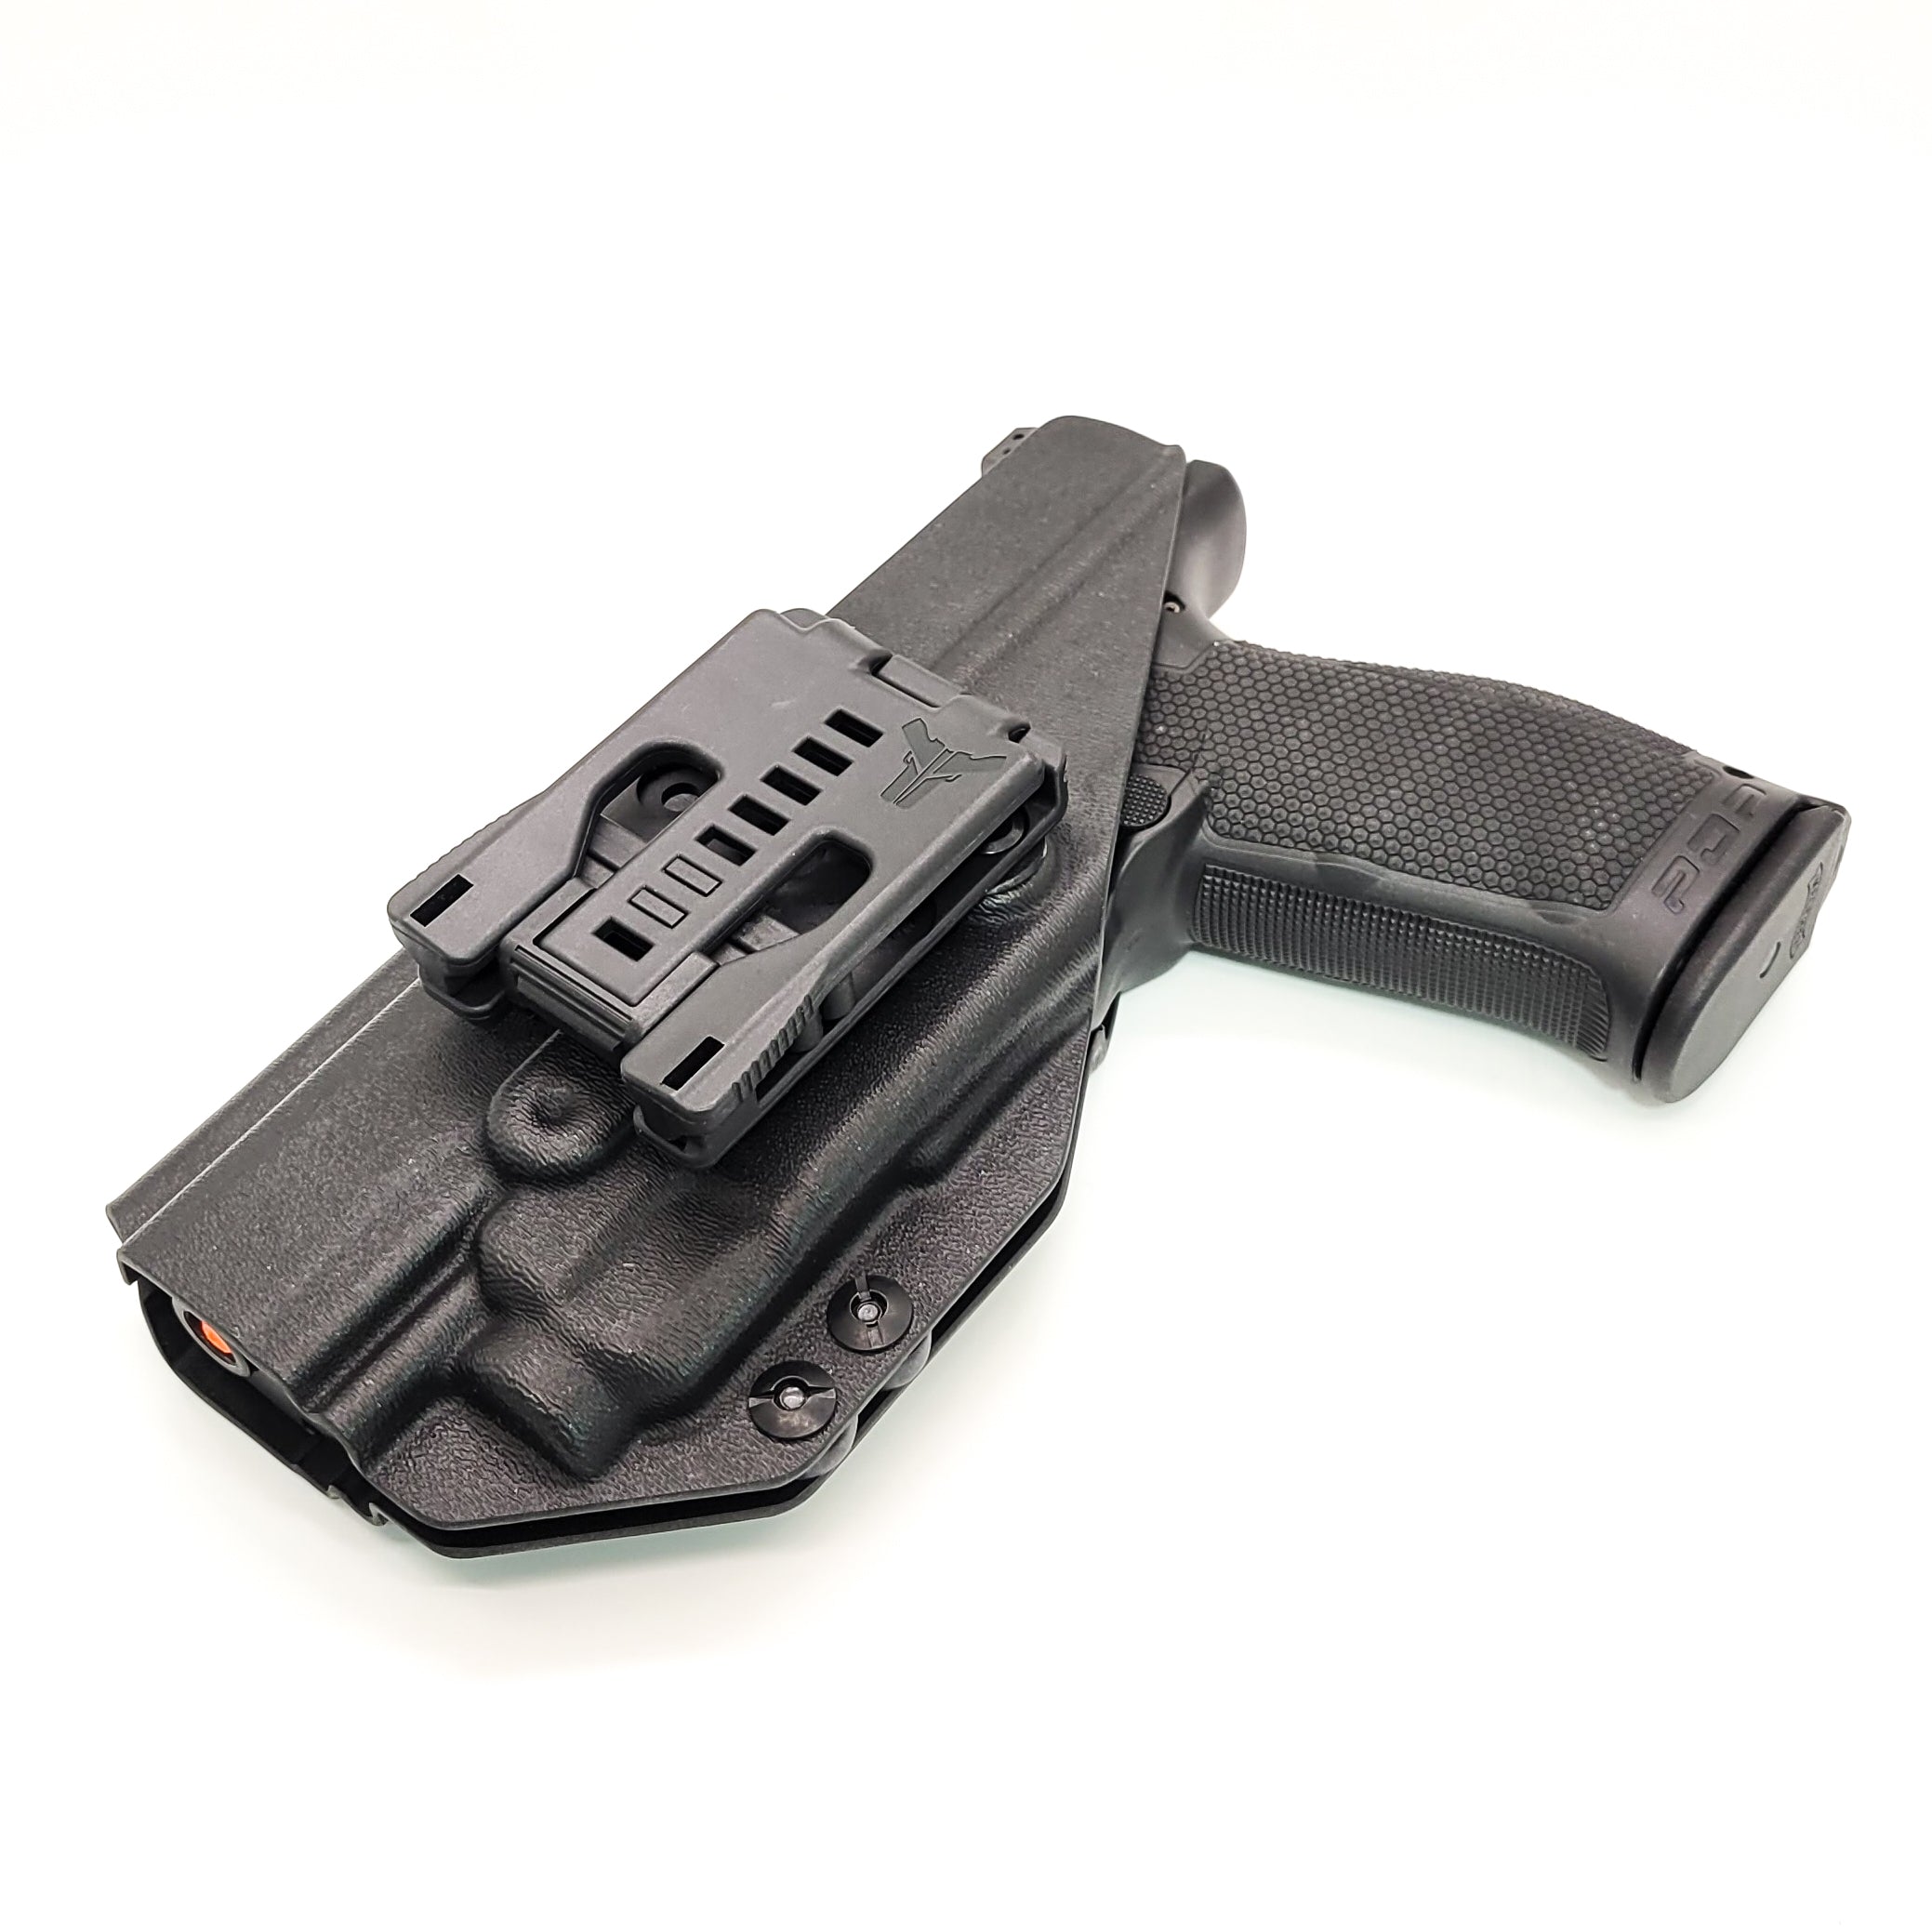 For the best Outside Waistband Taco Style Holster designed to fit the Walther PDP Pro SD 4.5" pistol with the Streamlight TLR-7A or TLR-7 mounted on the firearm, shop Four Brothers Holsters. Cut for red dot sight, full sweat guard, adjustable retention & open muzzle for threaded barrels & compensators. 